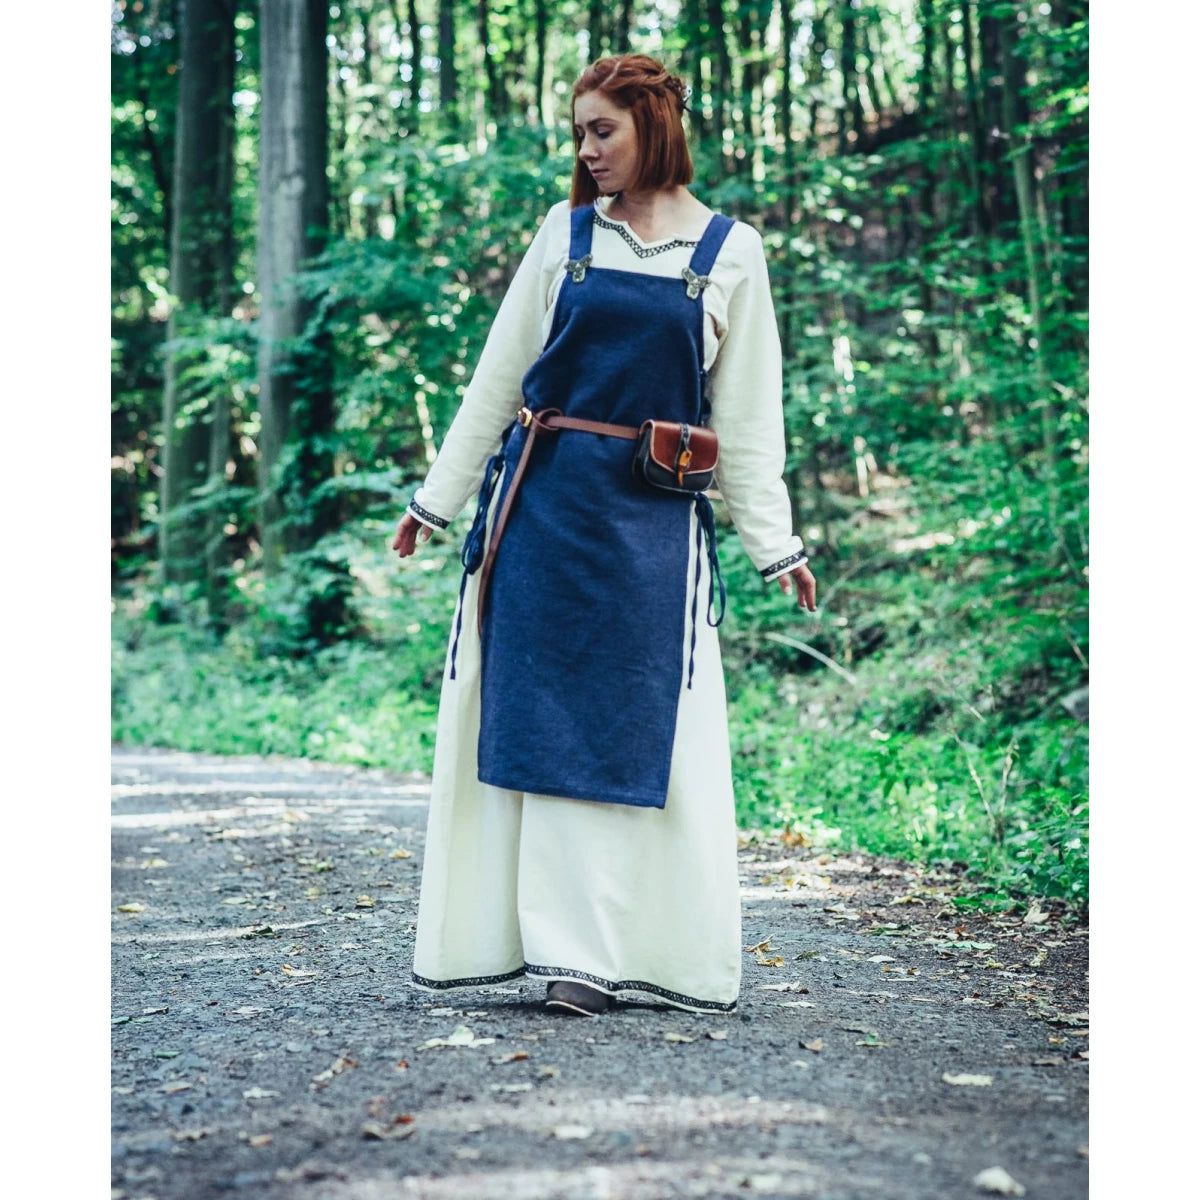 Authentic Viking over dress in 100% Cotton